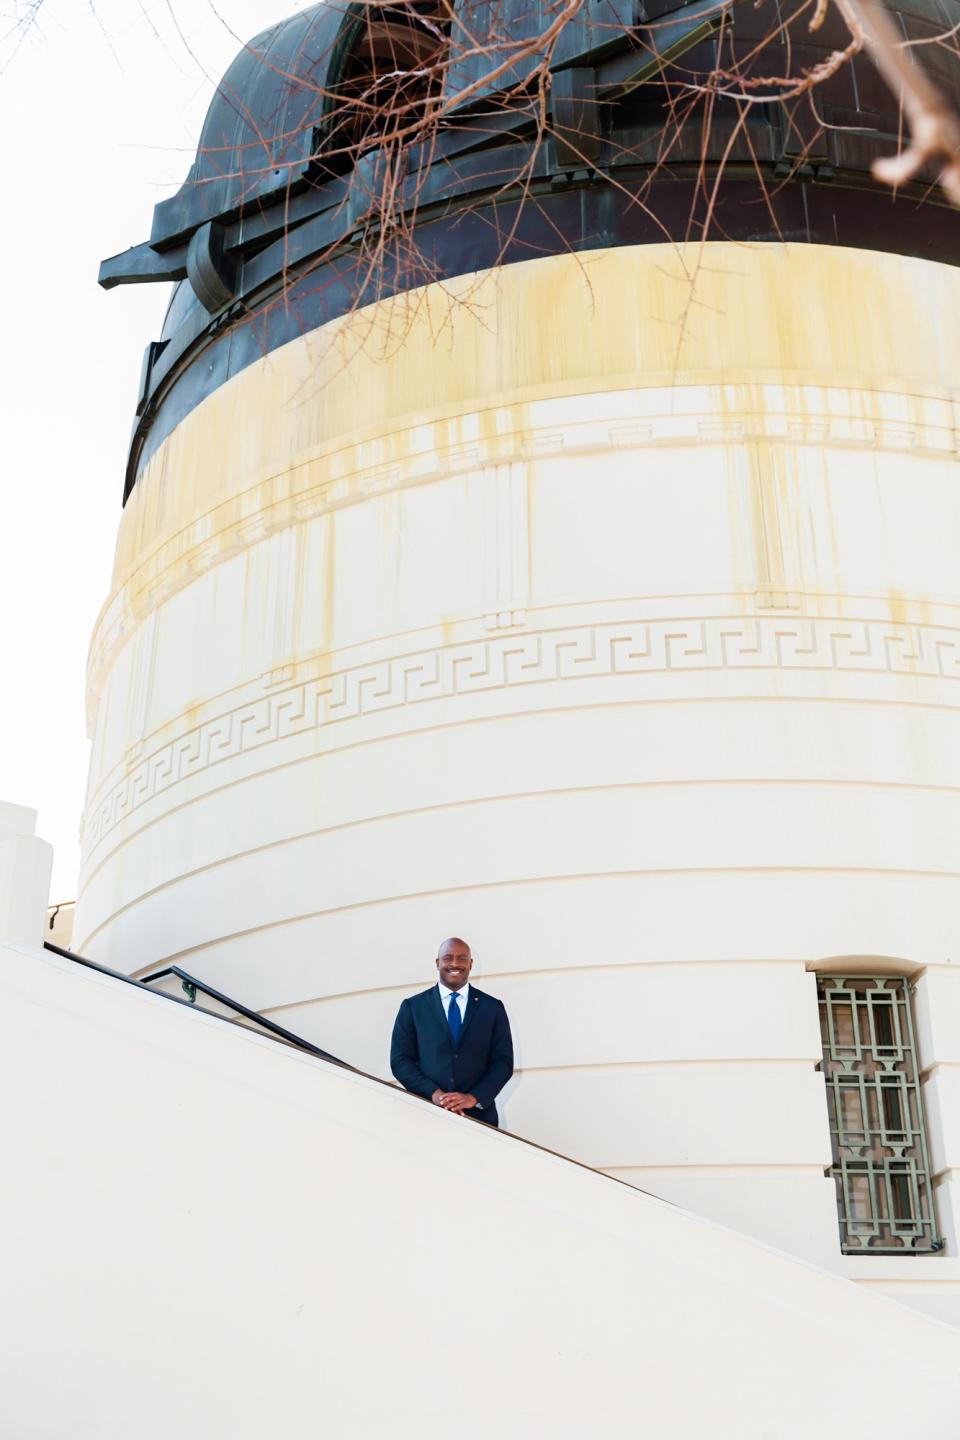 A day in Los Angeles with Leland Melvin, who went to space, came back, and somehow ended up on Darren Aronofsky's new documentary series <em>One Strange Rock</em>, about the planet he once looked down upon.